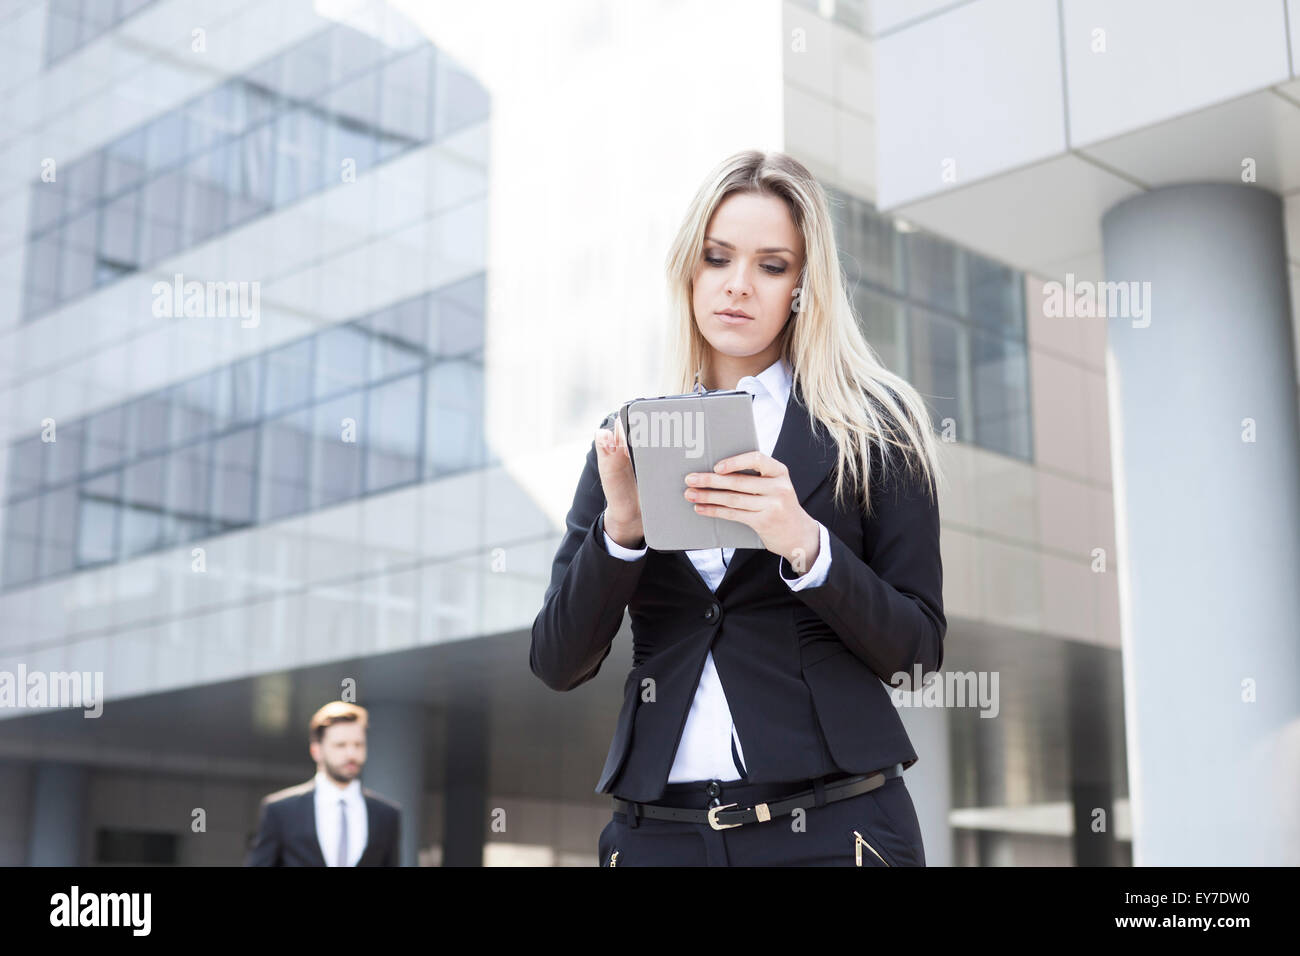 Business woman using digital tablet outdoors Stock Photo